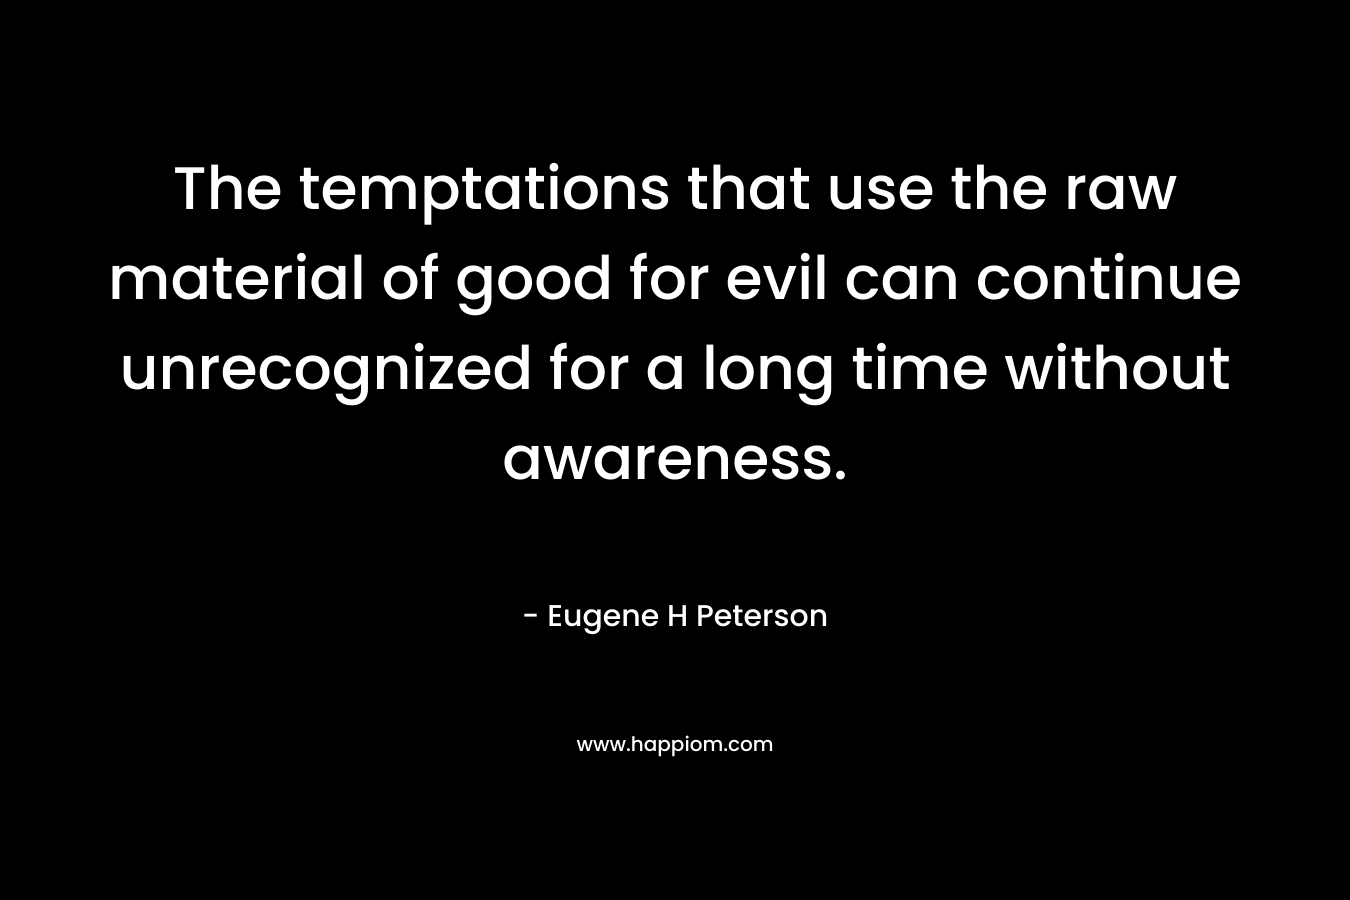 The temptations that use the raw material of good for evil can continue unrecognized for a long time without awareness. – Eugene H Peterson